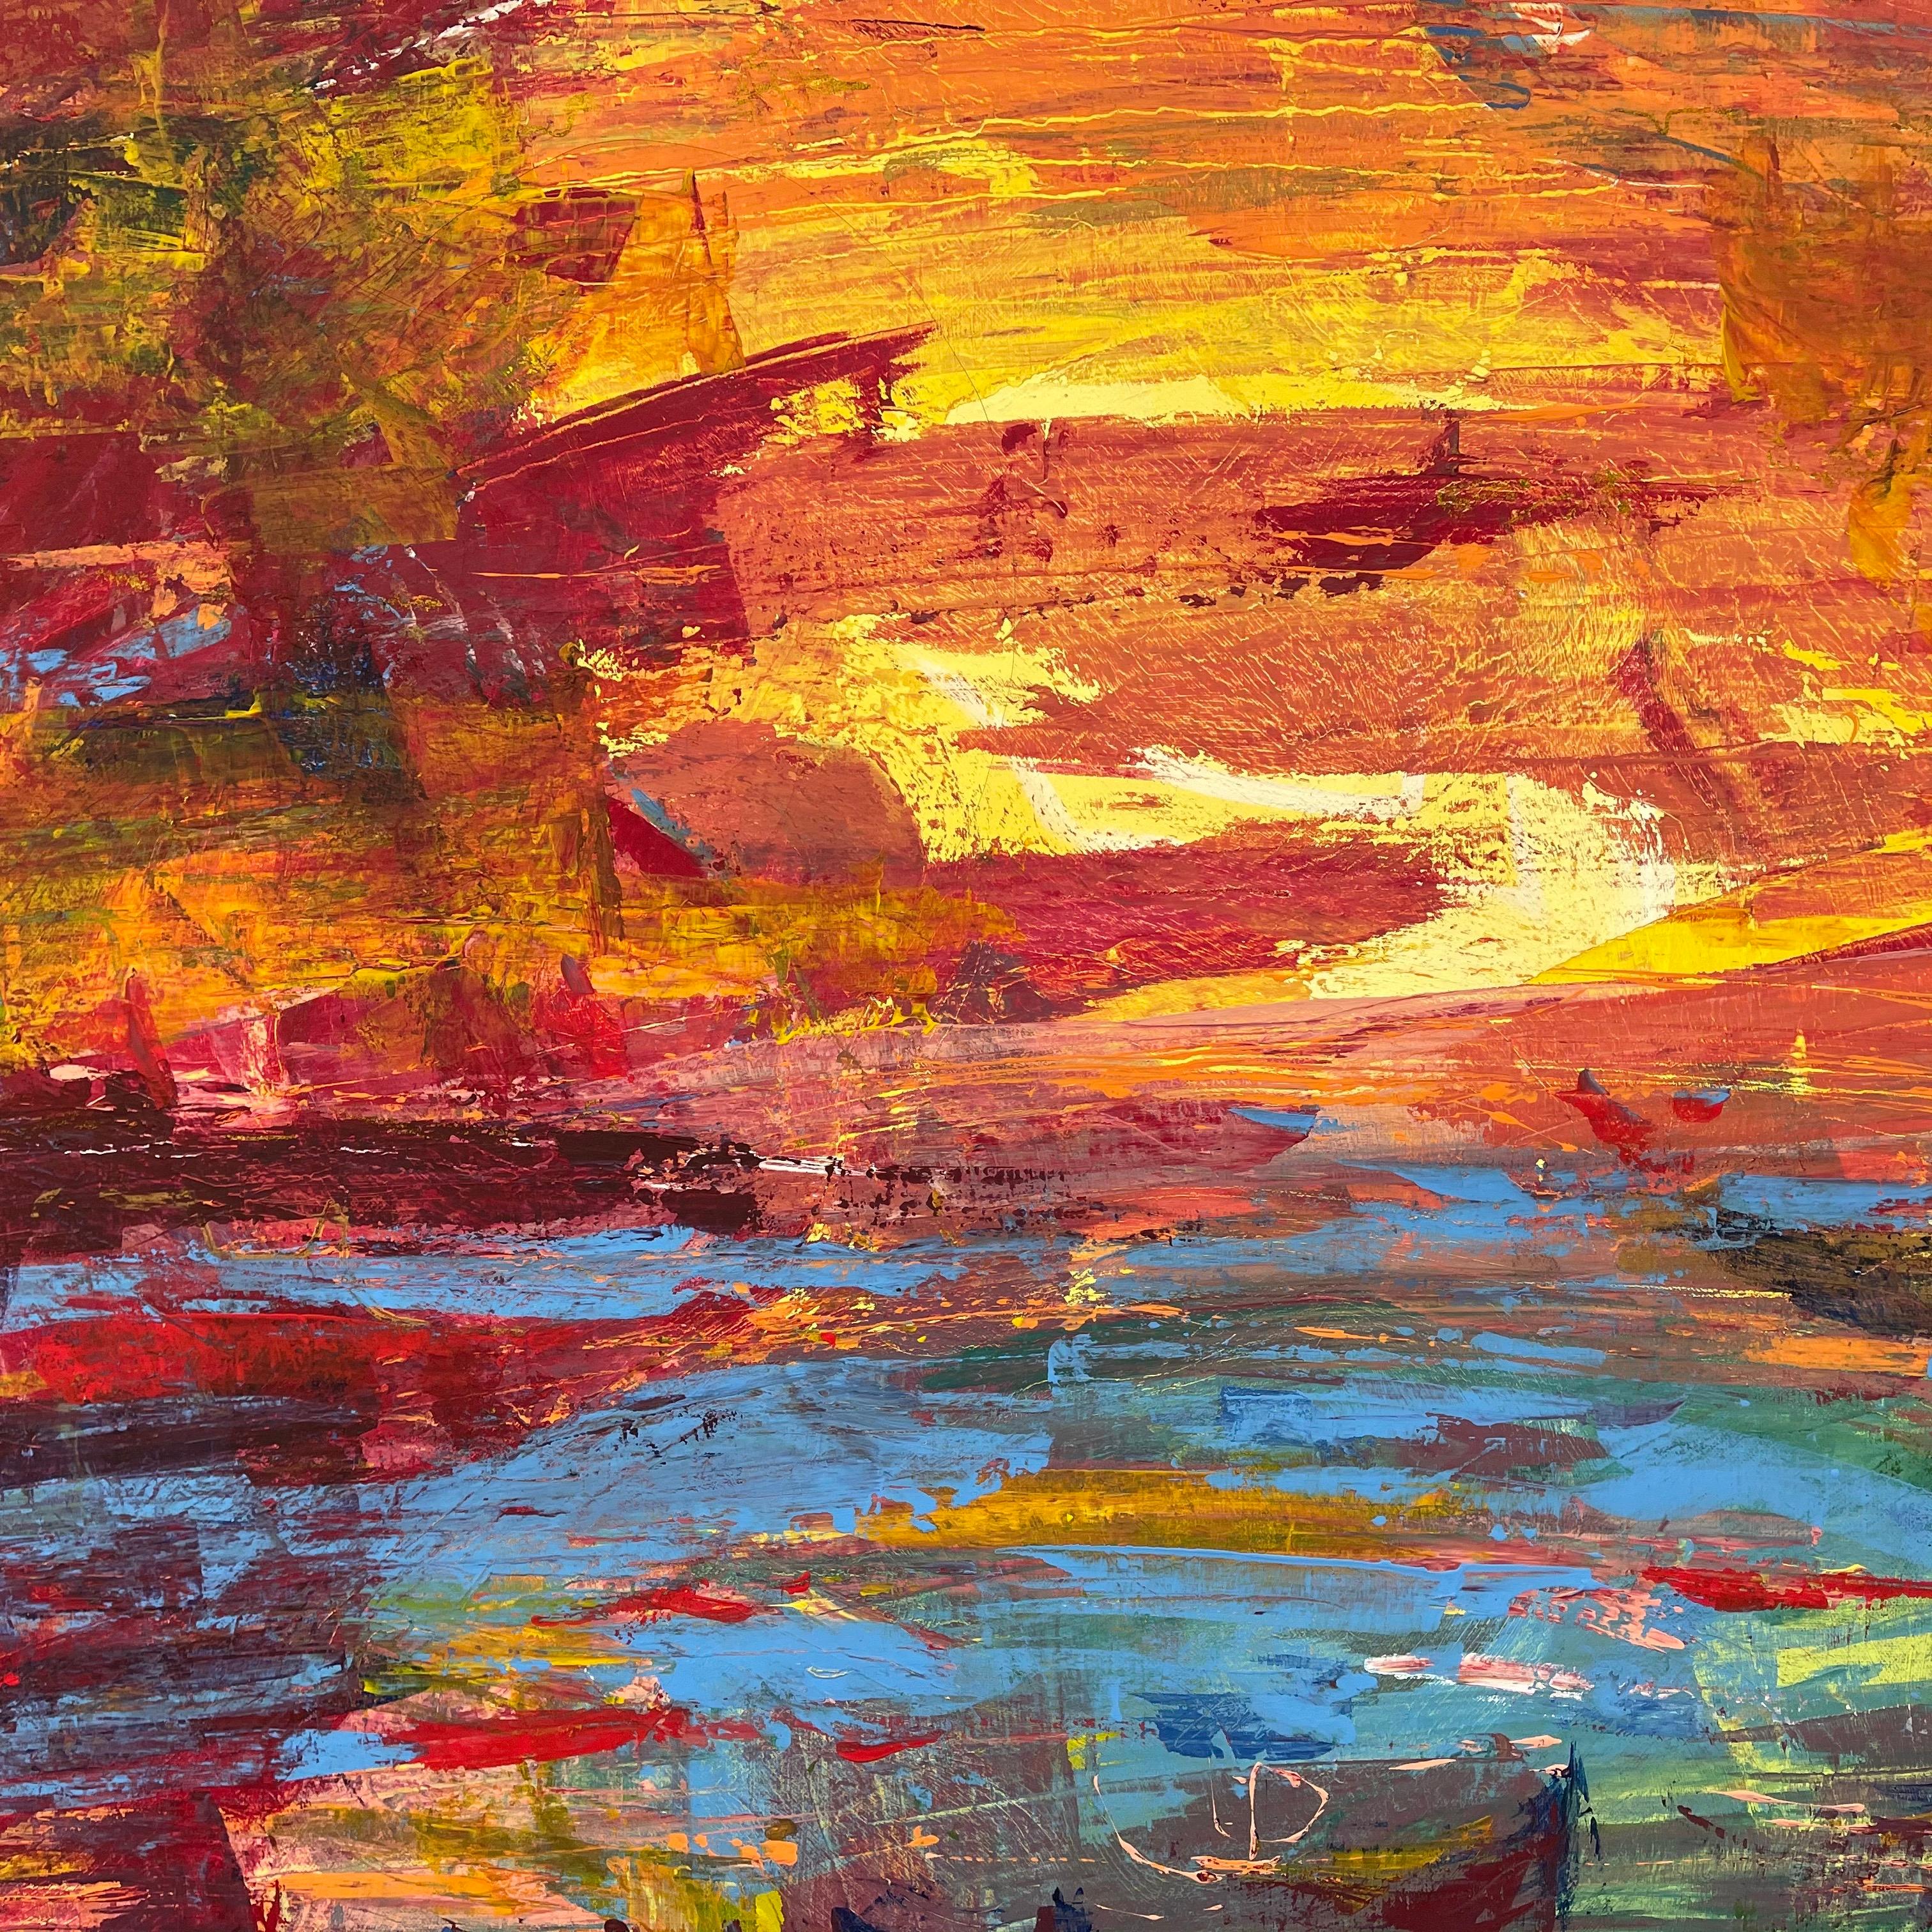 Abstract Blue Orange & Red Lake Sunset Landscape by Contemporary British Artist For Sale 7